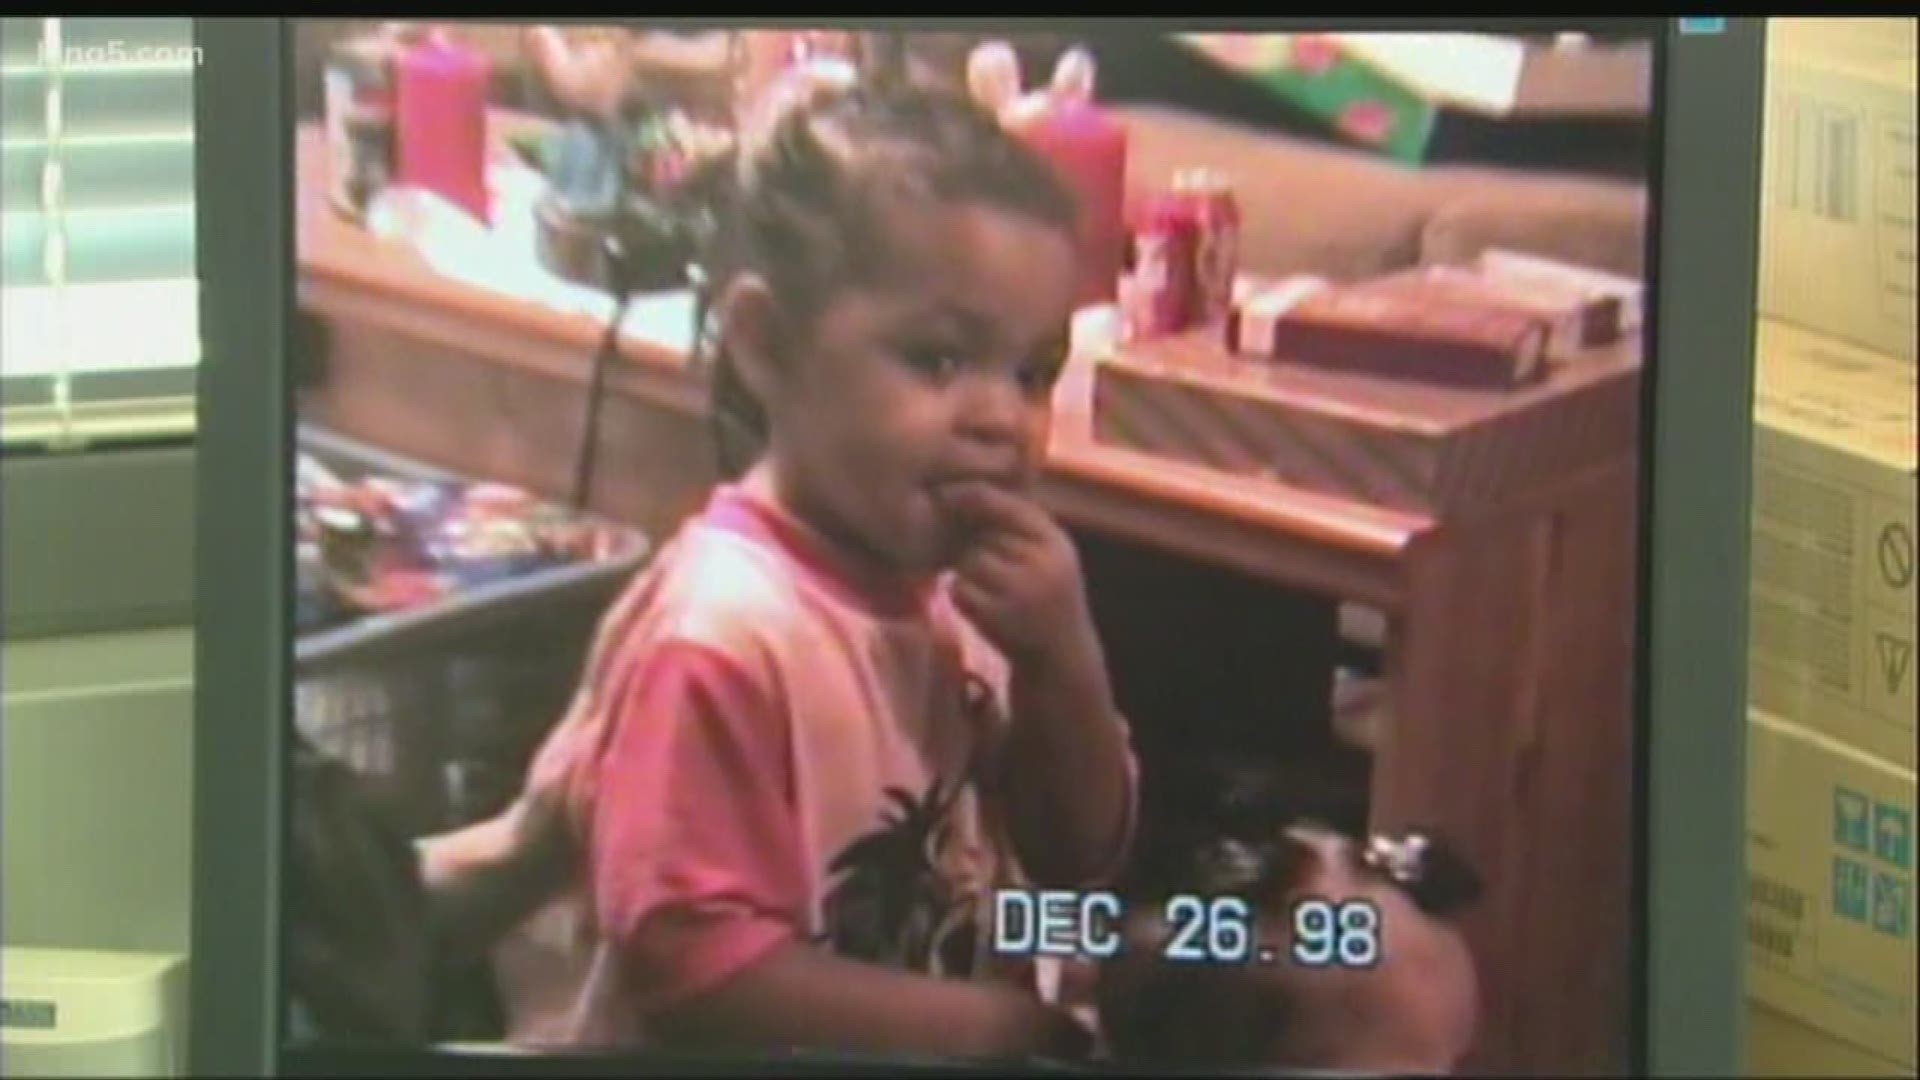 Teekah Lewis was kidnapped when she was two years old at an old bowling alley in Tacoma.